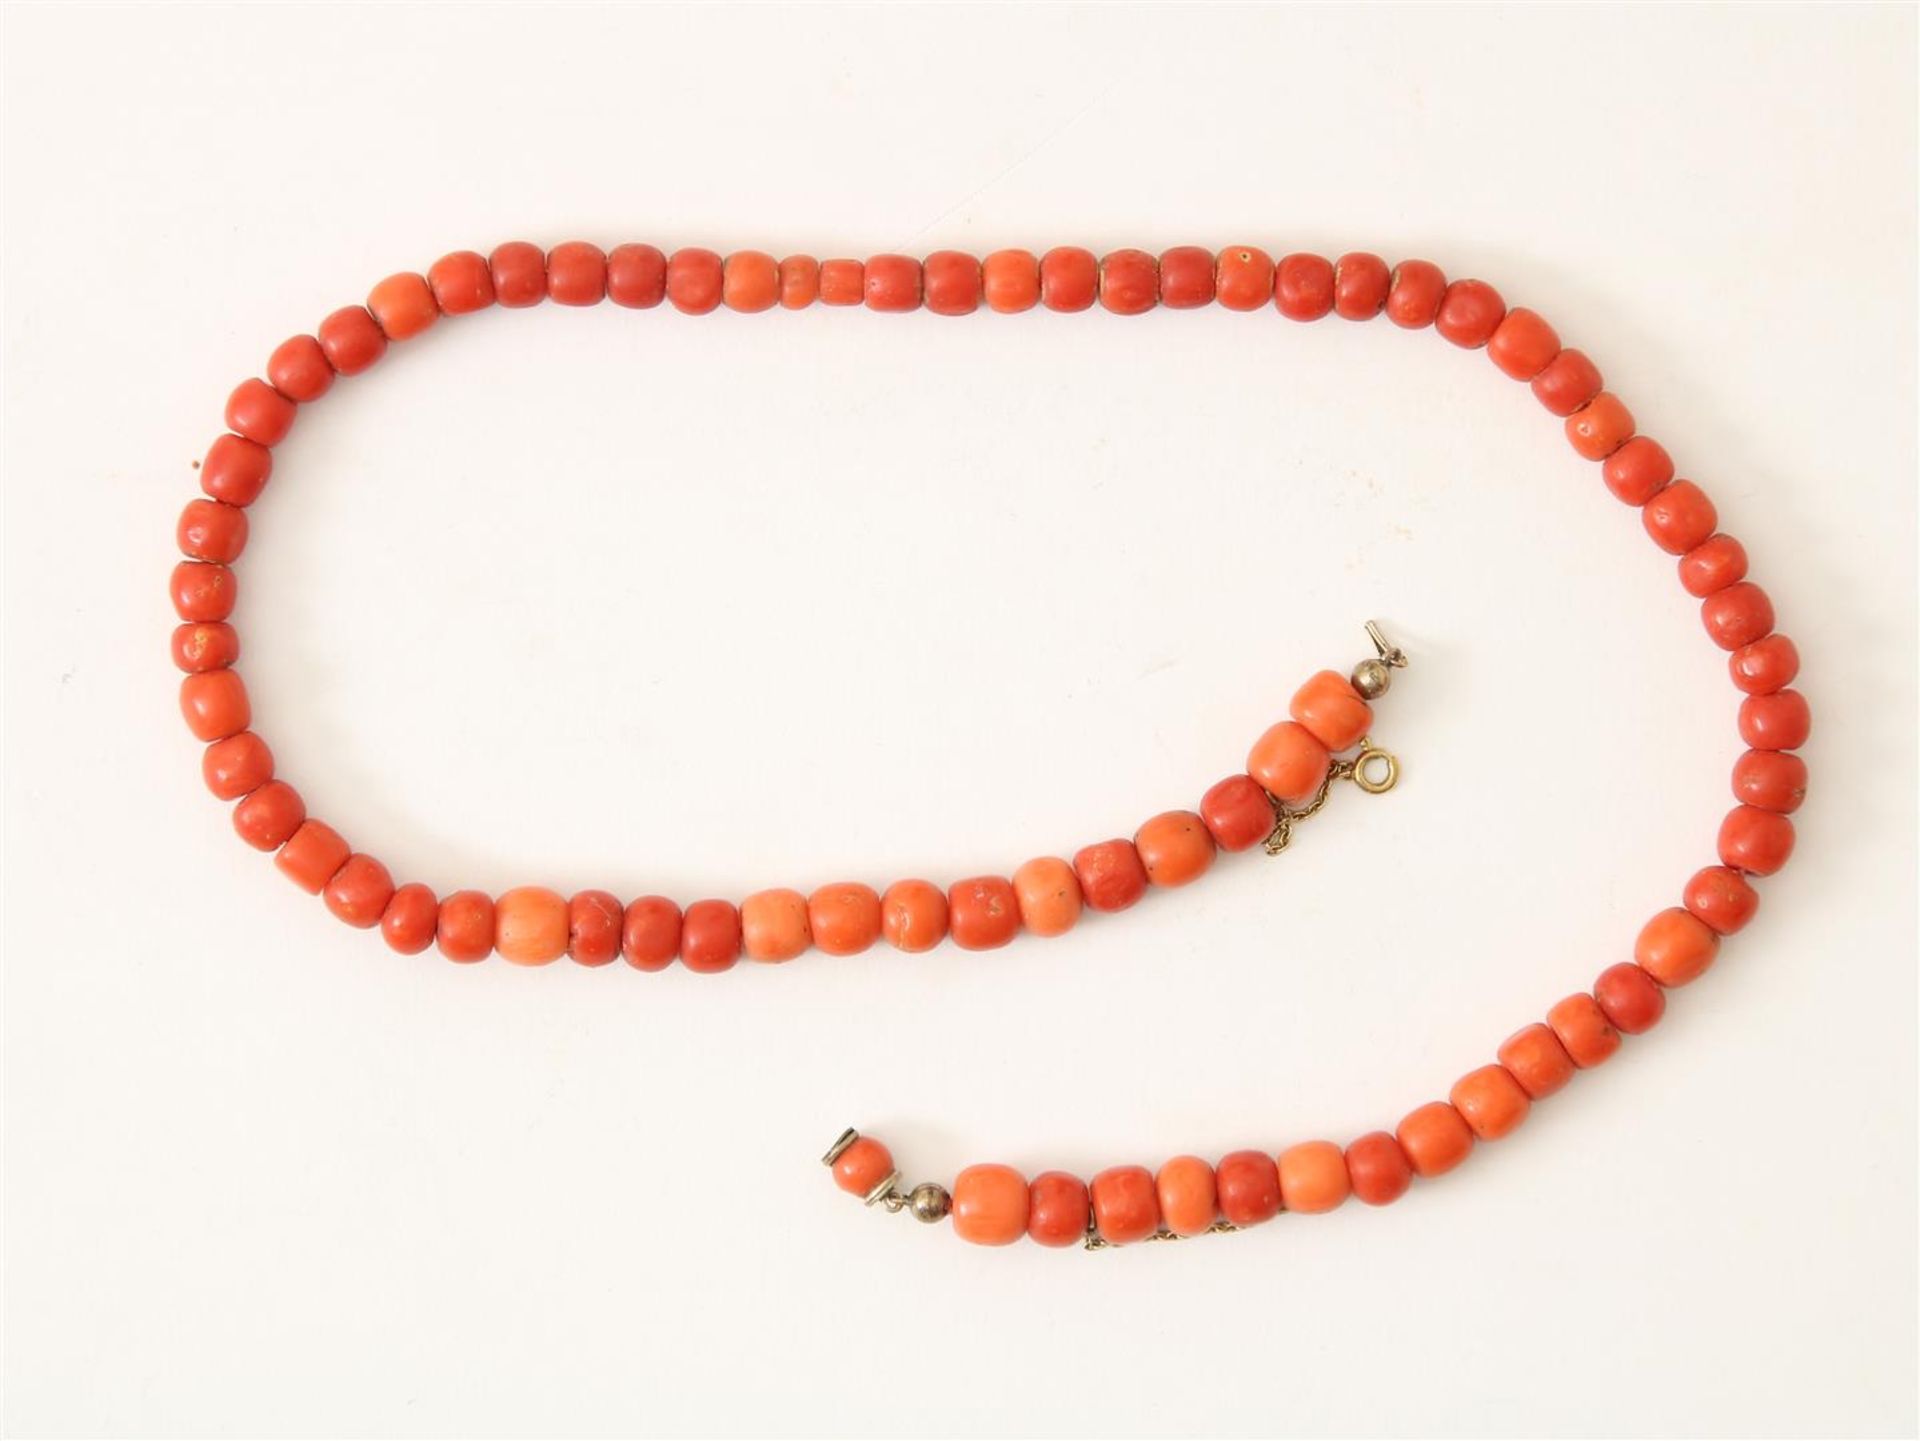 Red coral cheese necklace on hook clasp and gold safety chain l. 47 cm. - Image 2 of 3